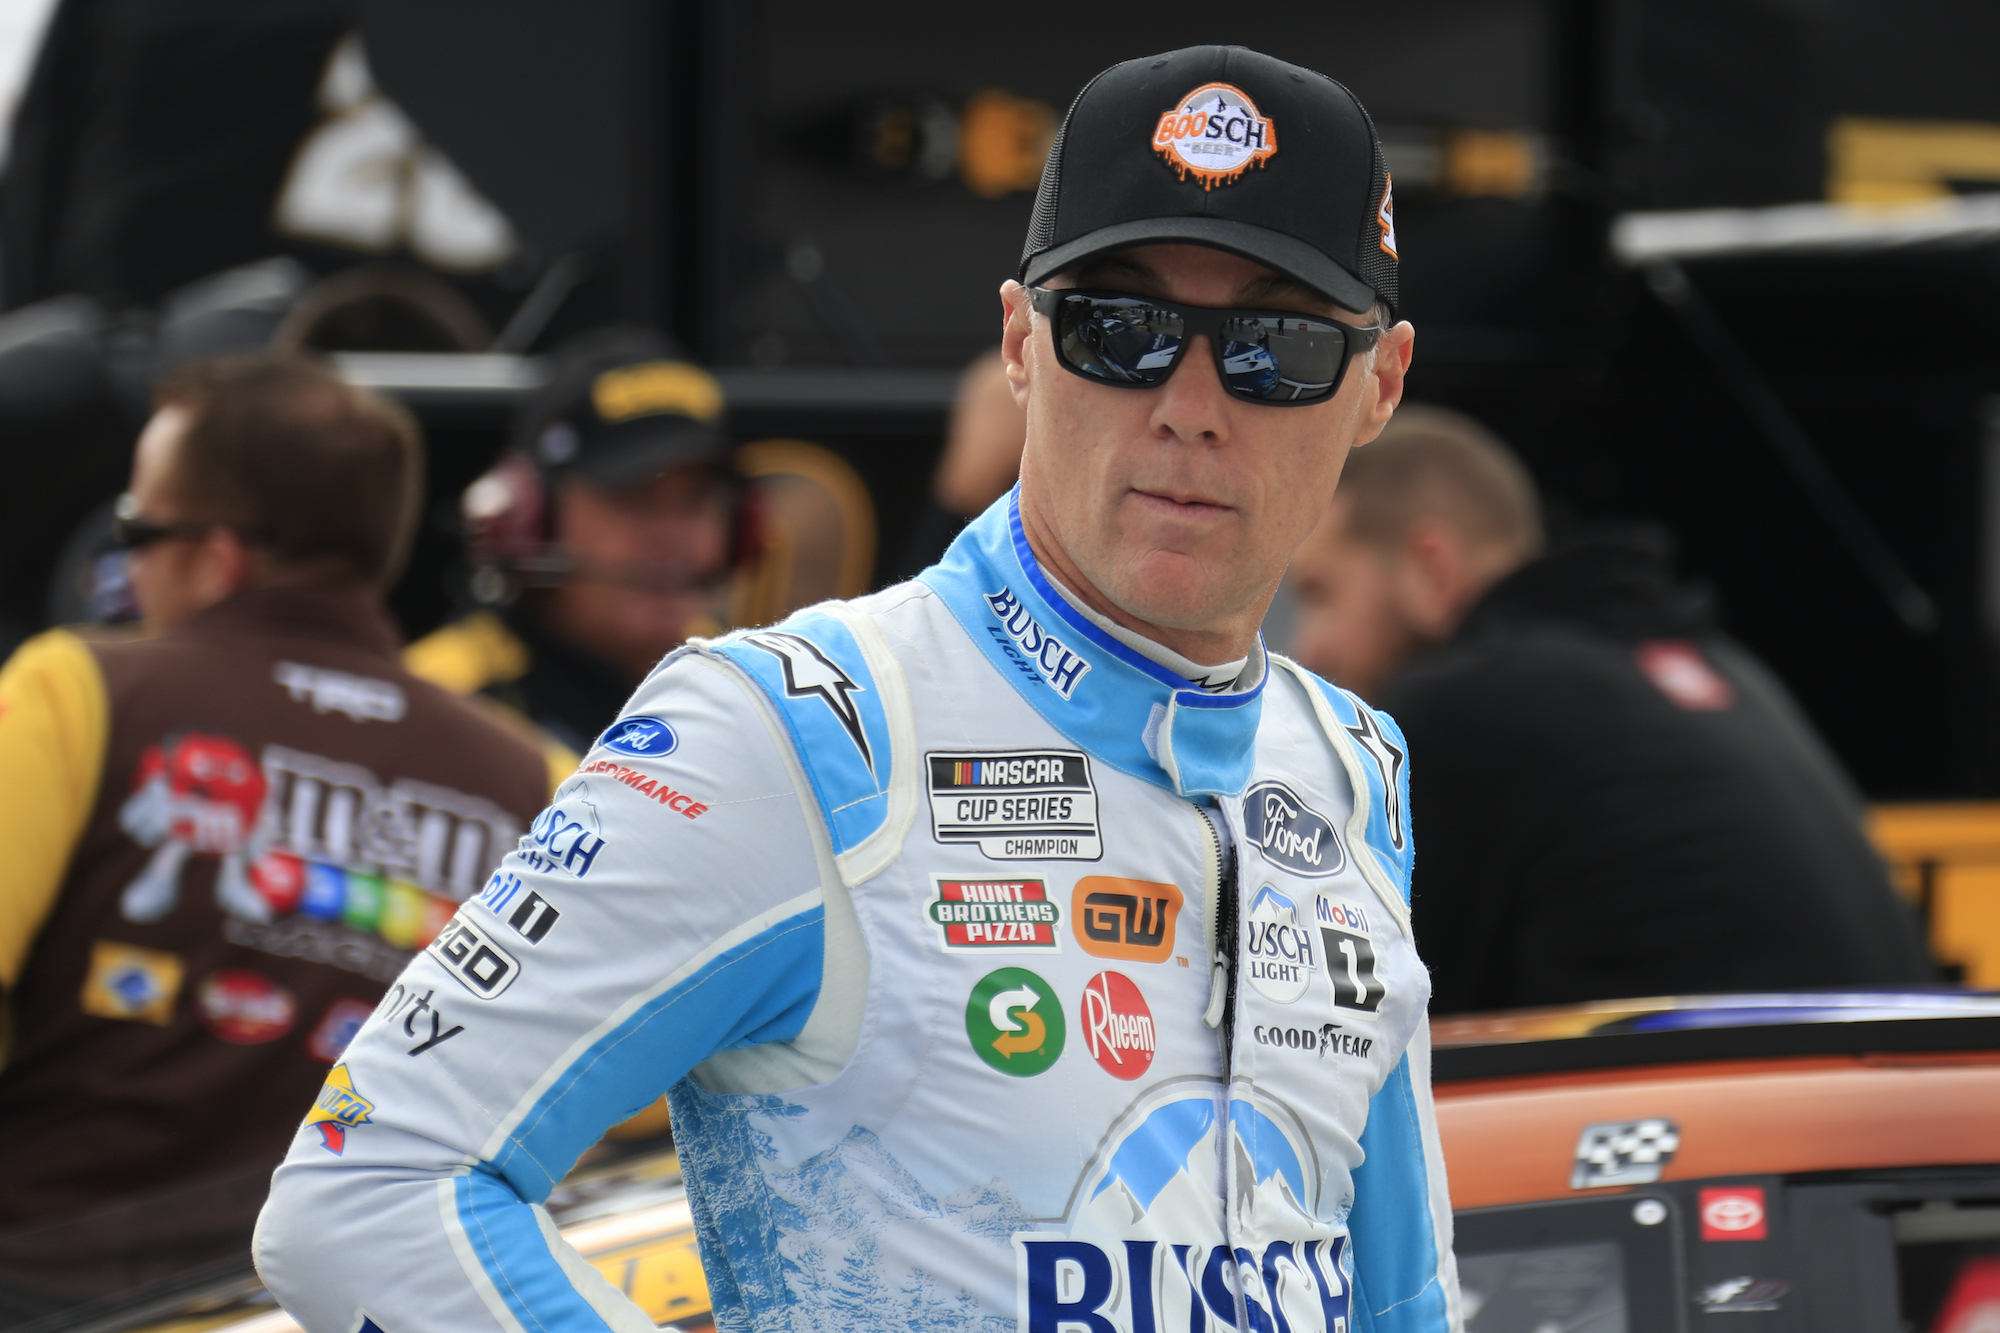 Kevin Harvick’s Curious Twitter Response Makes Fans Wonder If He’s Seriously Considering Racing in Another Series Outside of NASCAR in 2023